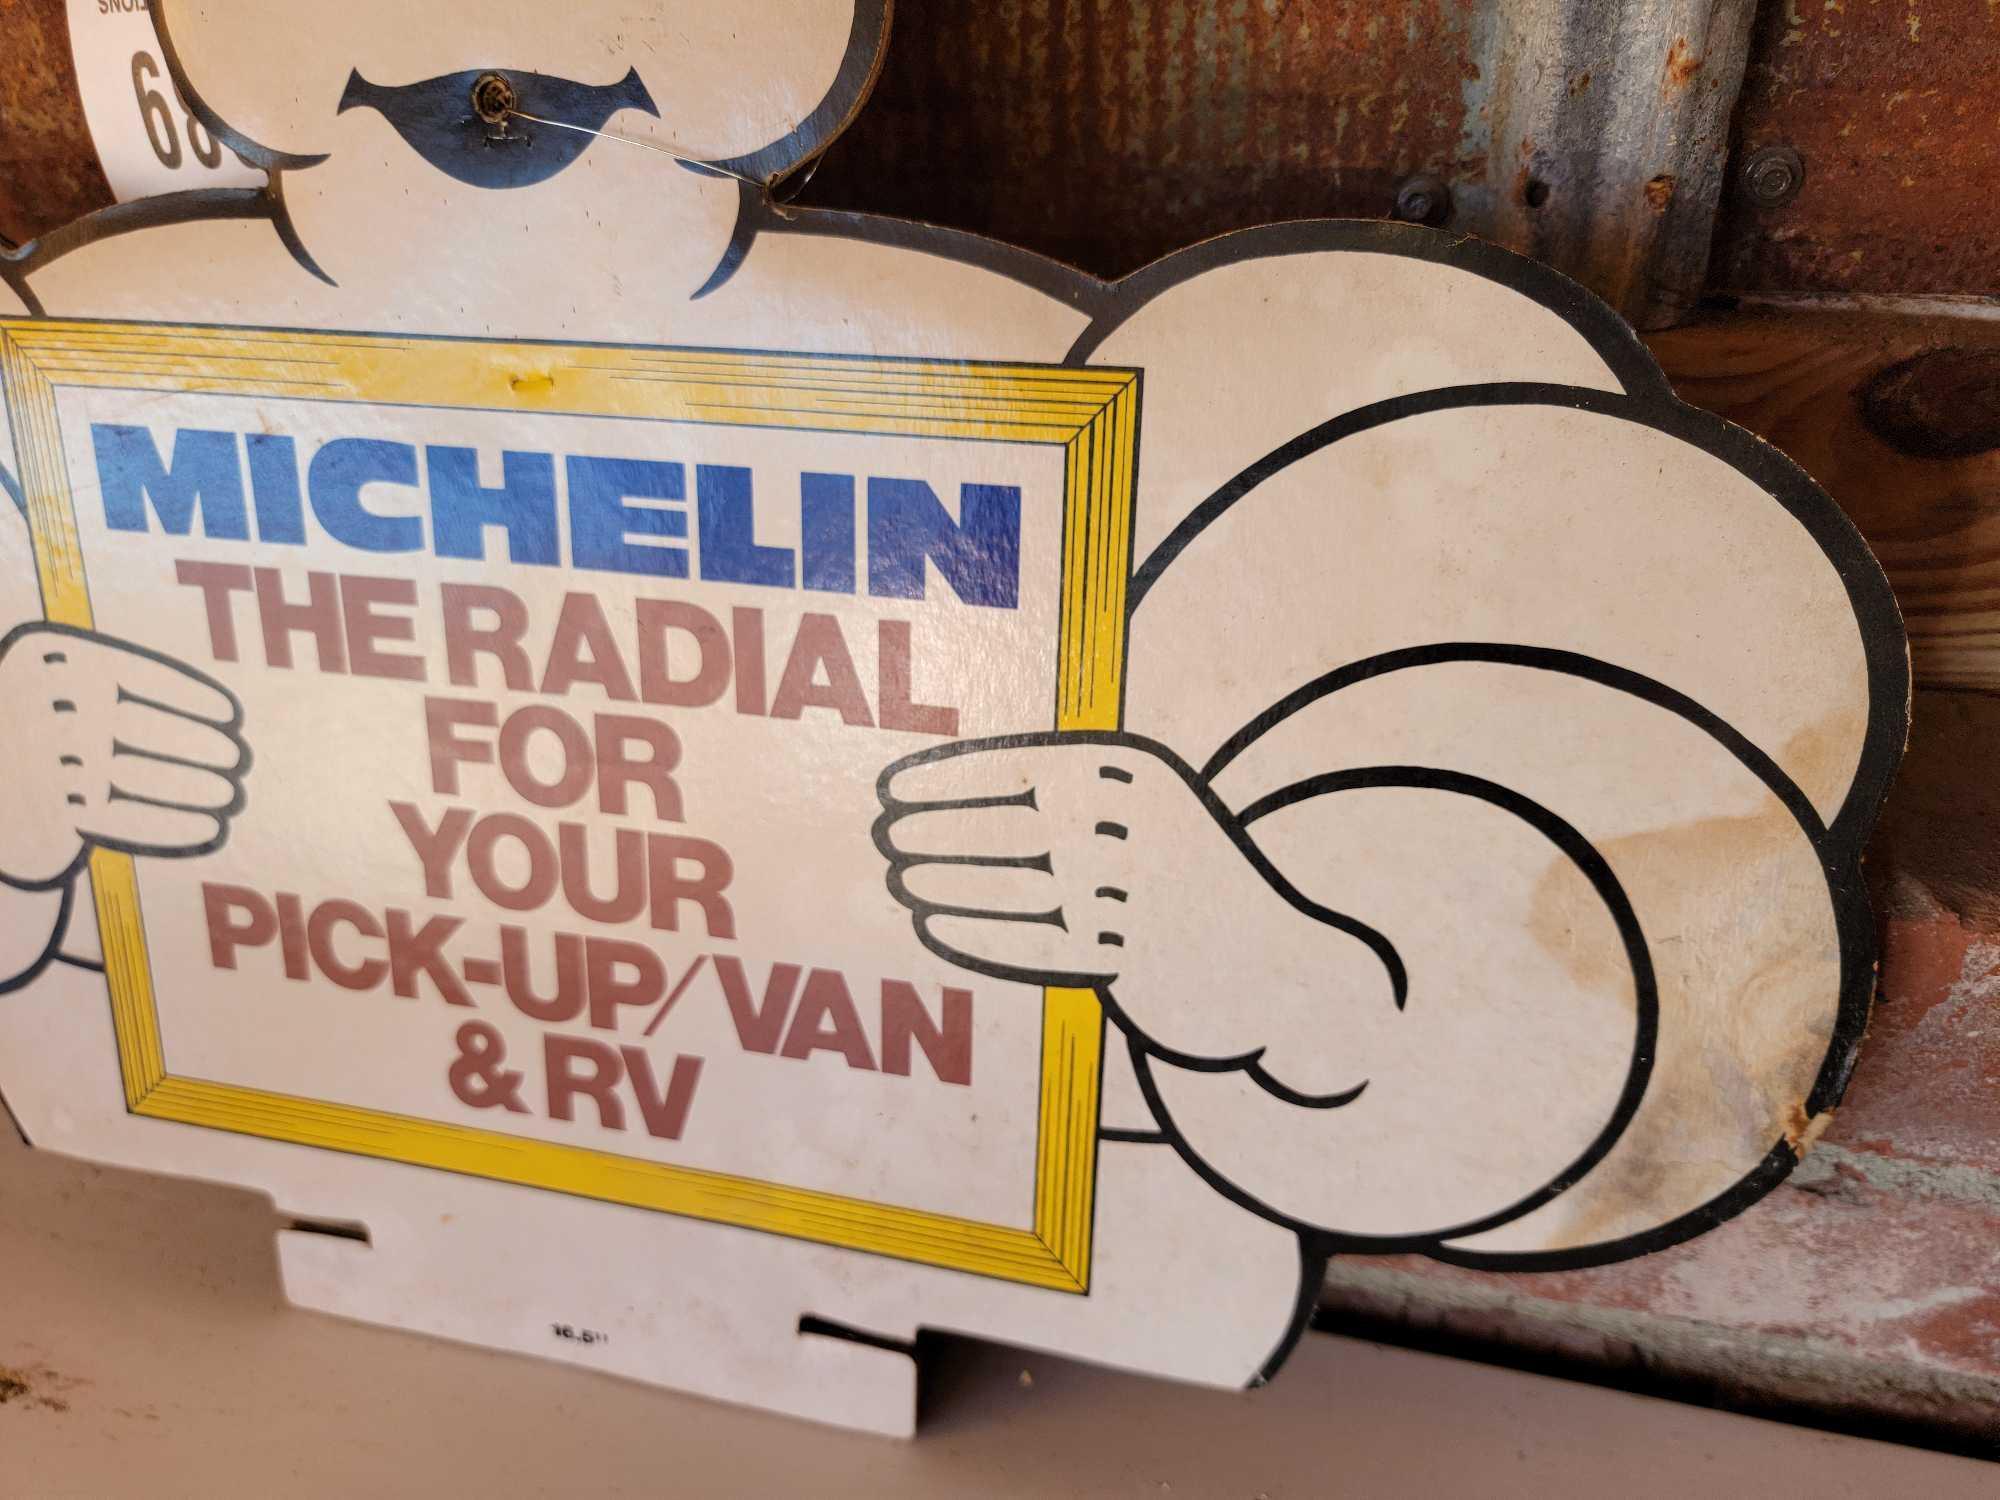 "MICHELIN THE RADIAL FOR YOUR PICK-UP"